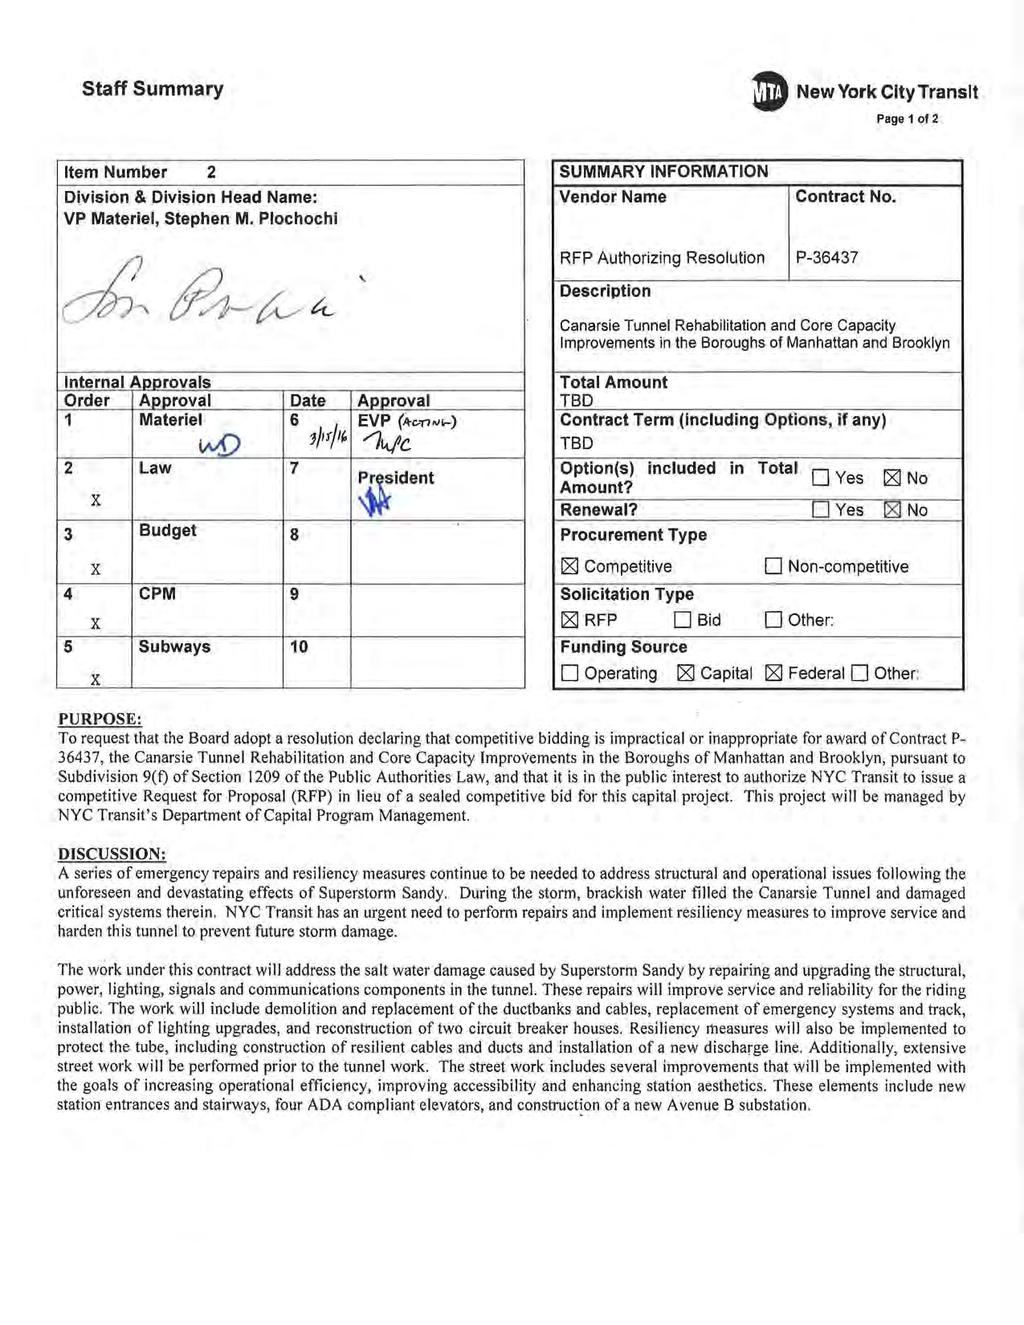 Staff Summary D New York City Transit Page 1of2 Item Number 2 Division & Division Head Name: VP Materiel, Stephen M. Plochochi SUMMARY INFORMATION Vendor Name Contract No.